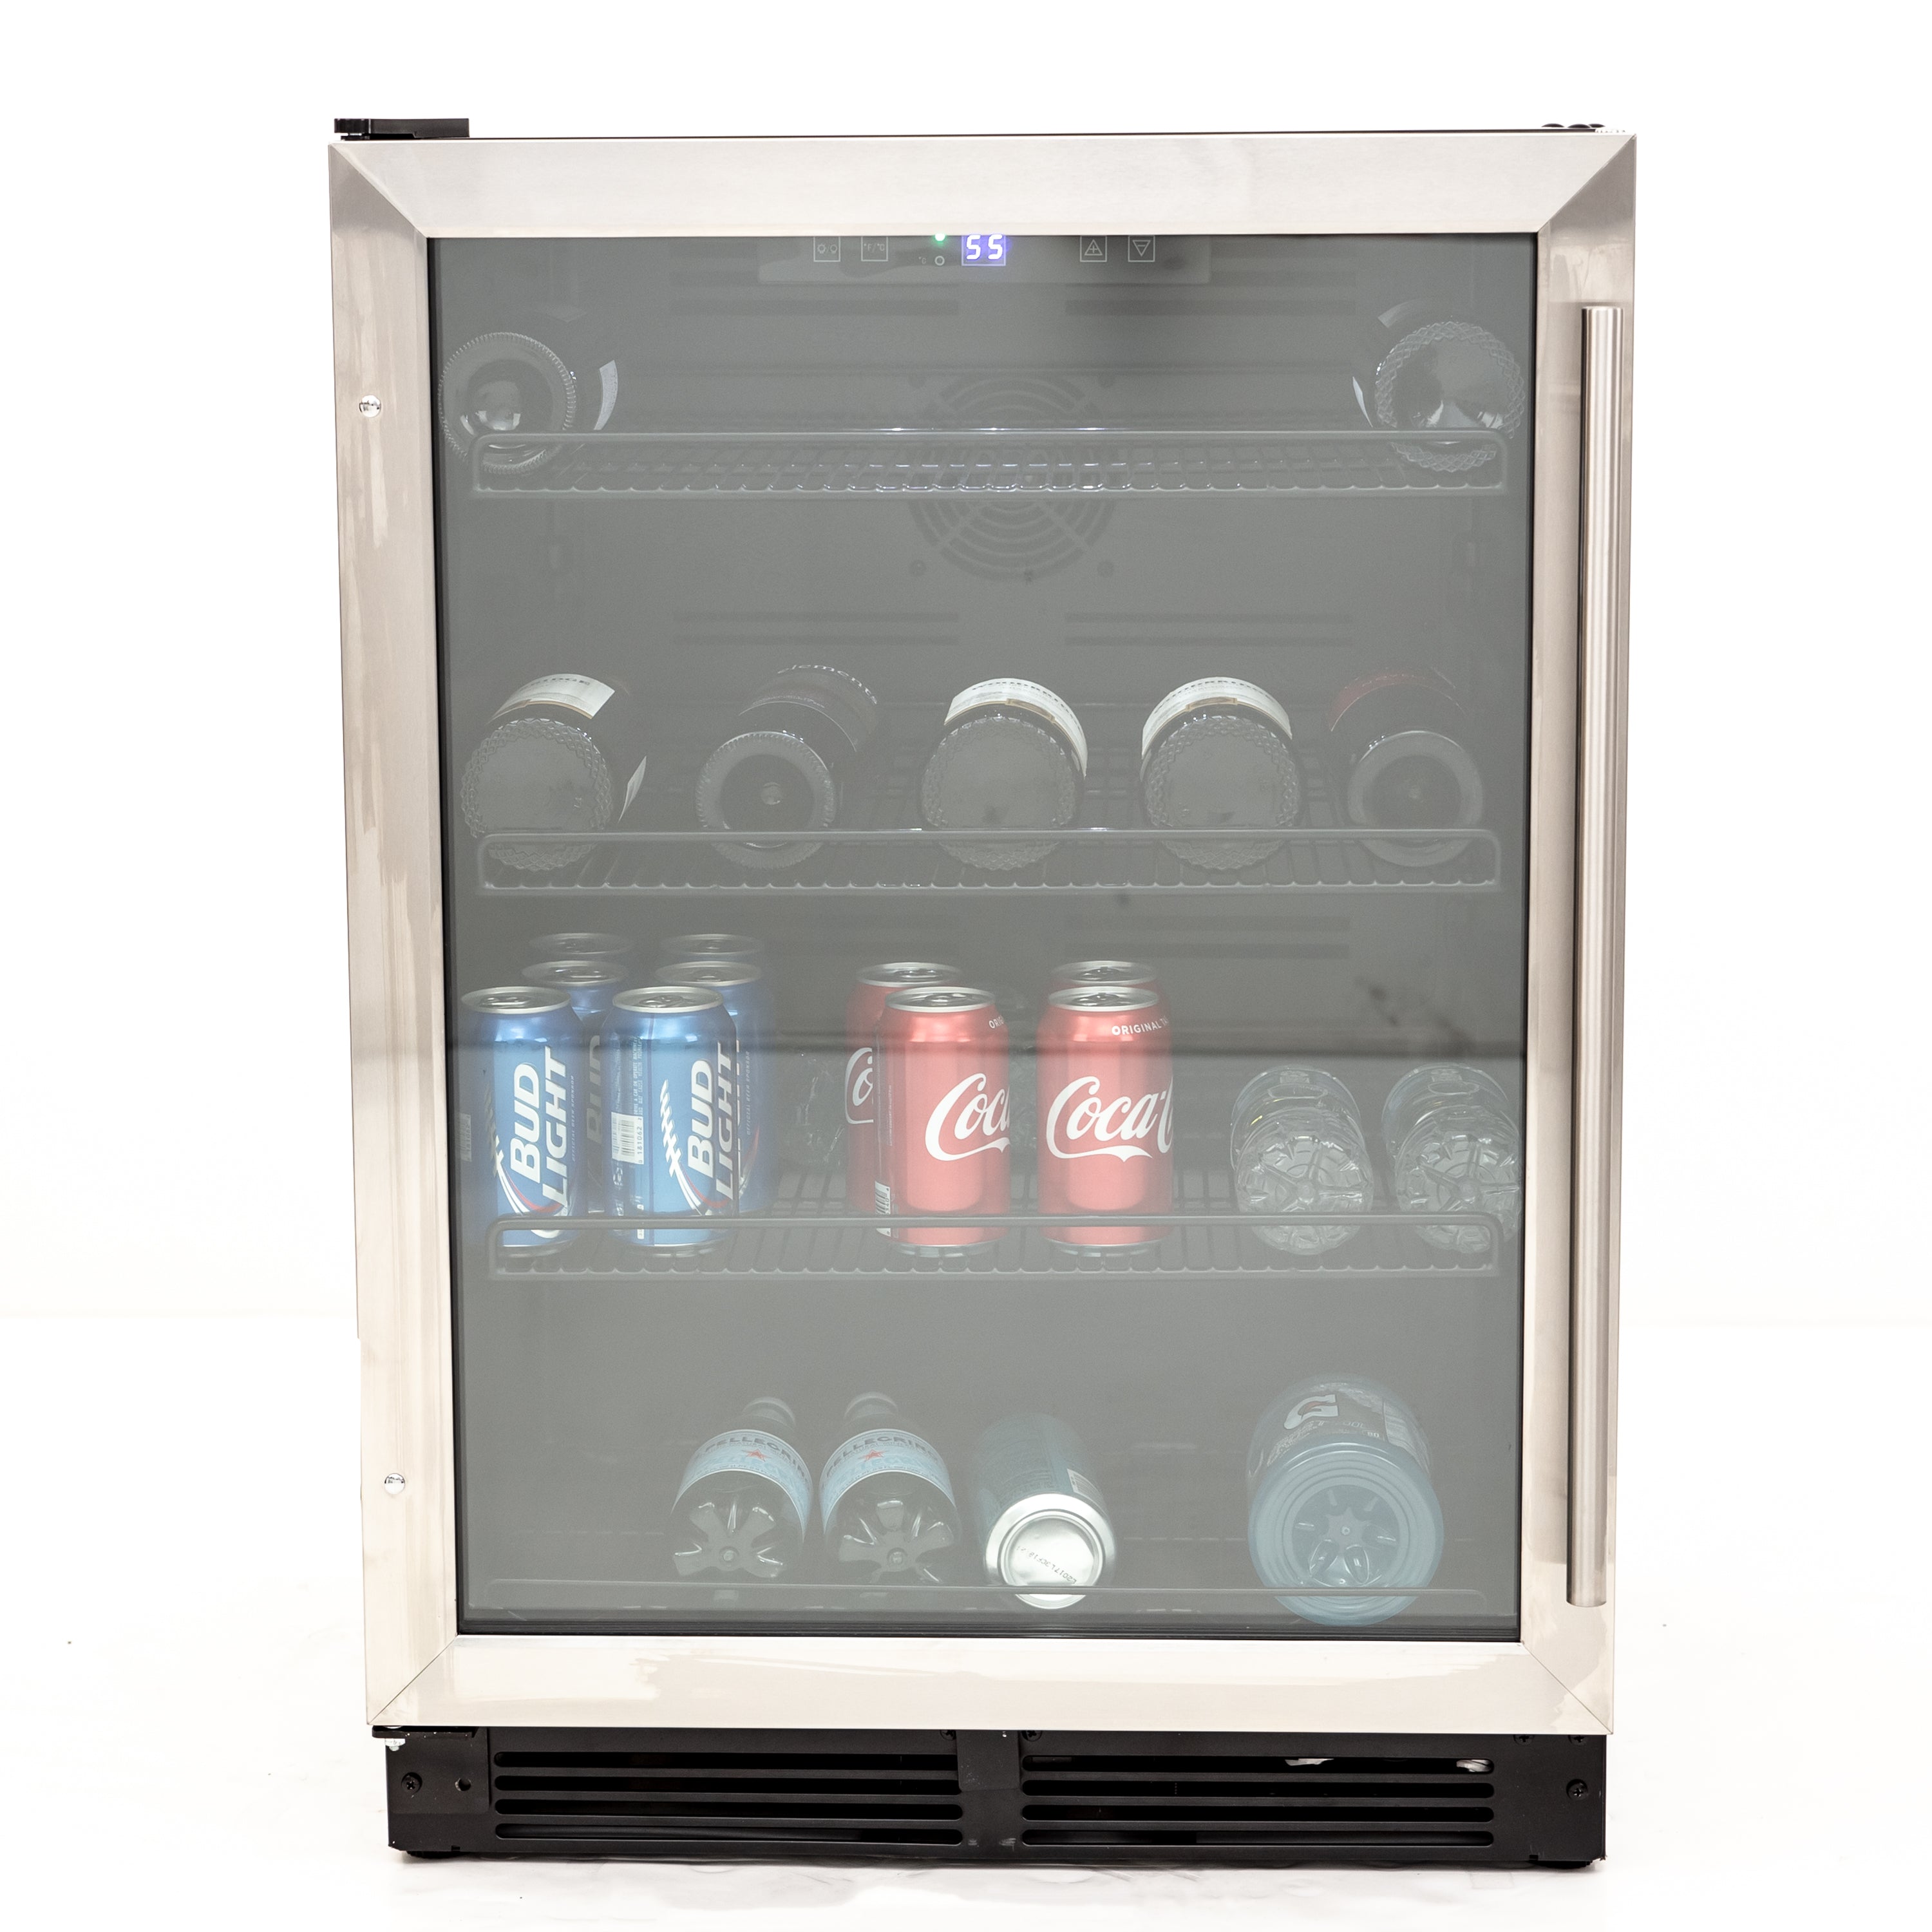 Avanti - BVB52T4S, Avanti Beverage Center, 133 Can Capacity, in Stainless Steel with Black Cabinet